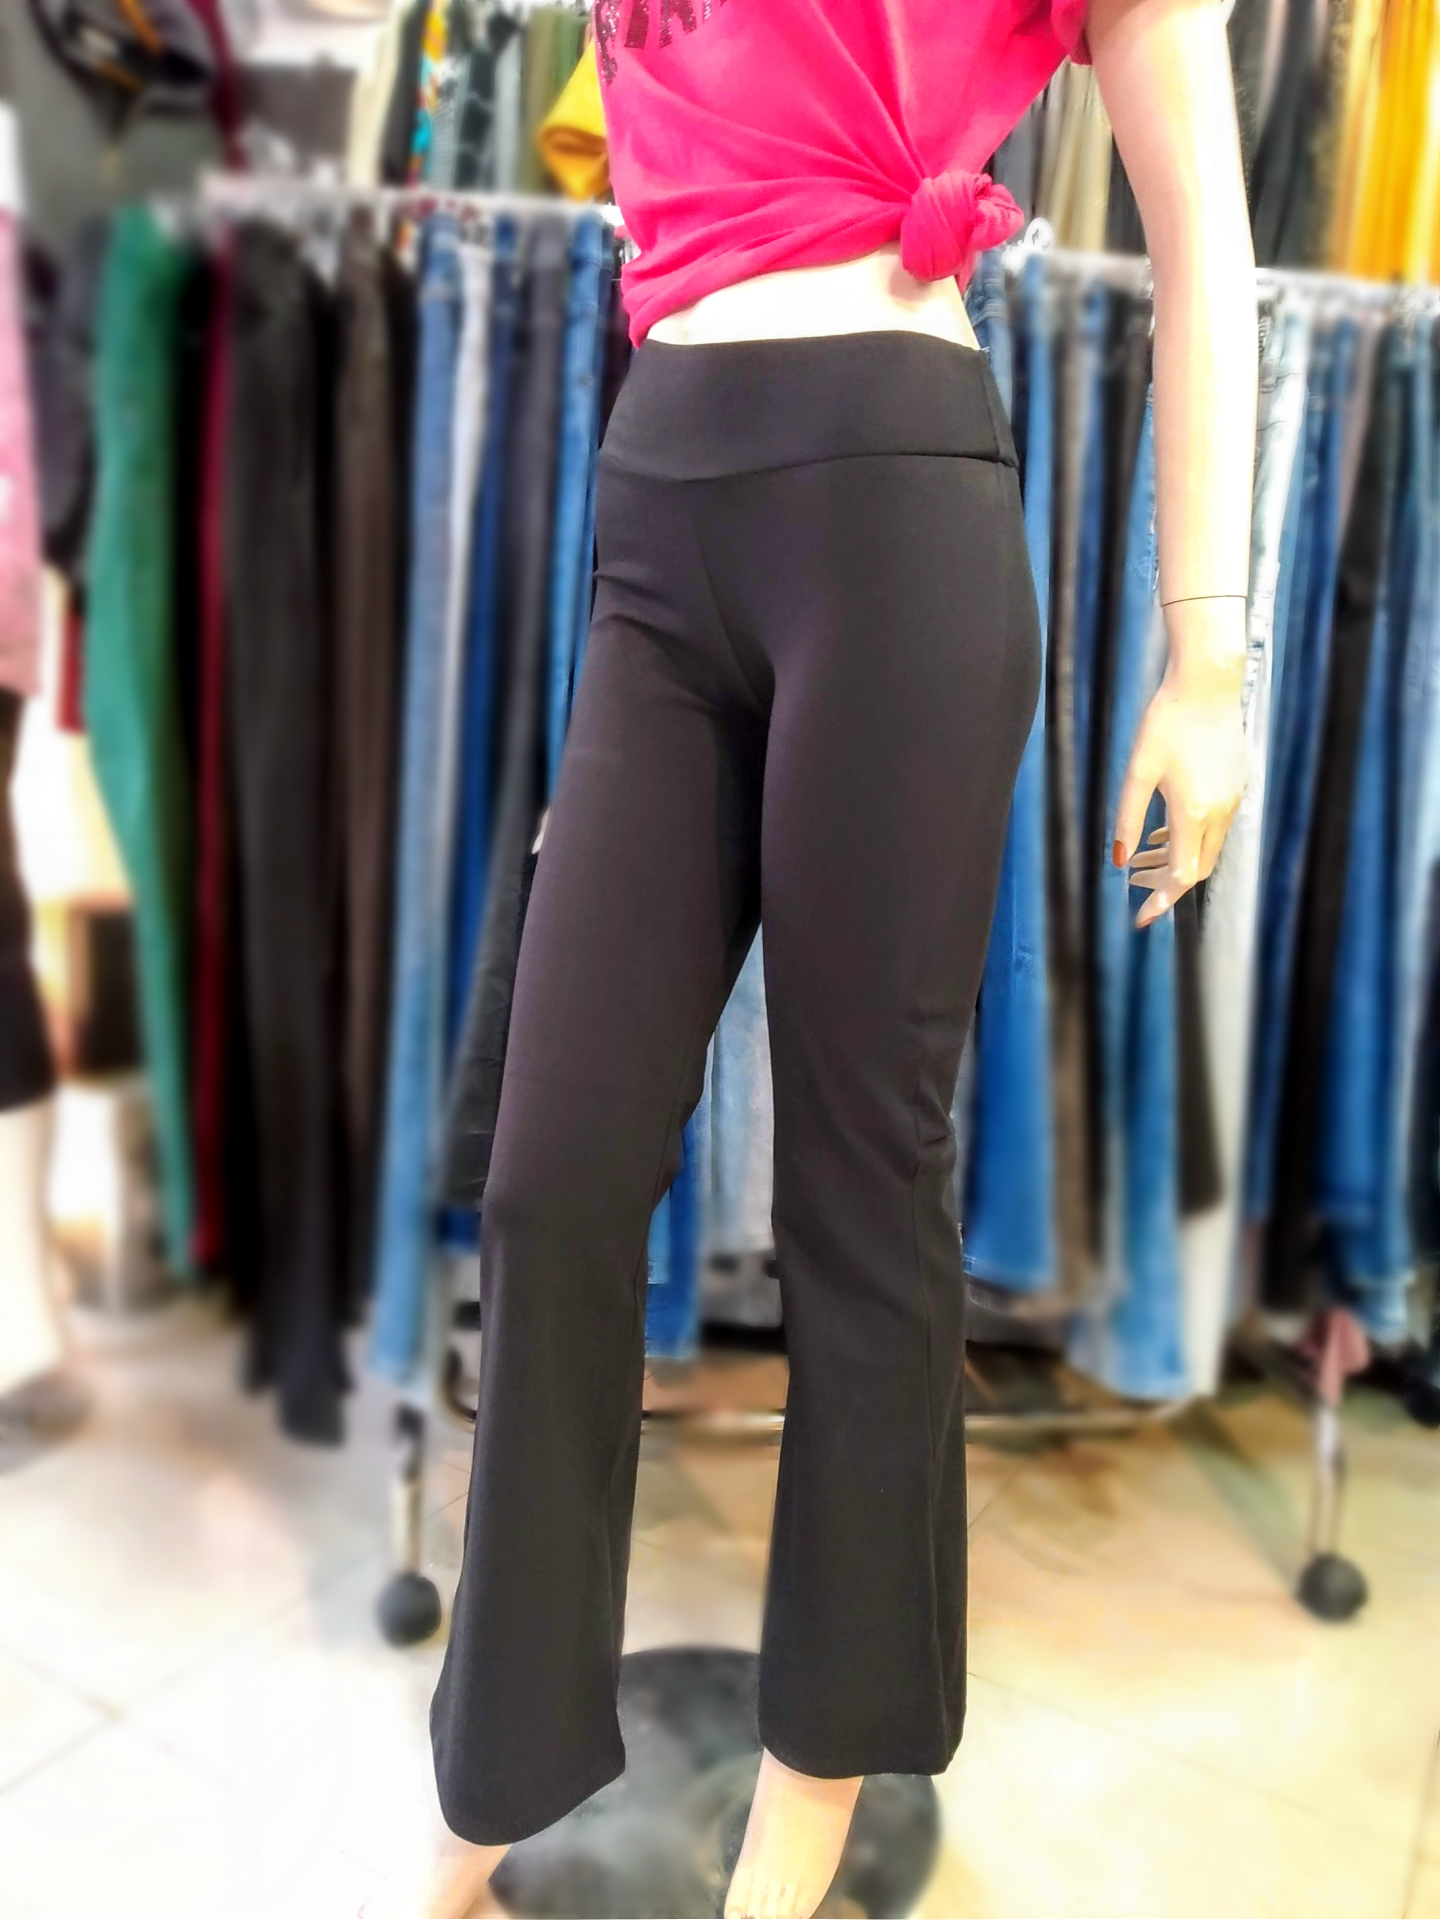 Great high waist black cotton leggings! The cut is a straight tube up to the ankle. The waist is high, adjusted by a double waistband, with no compressing elastic inside. 